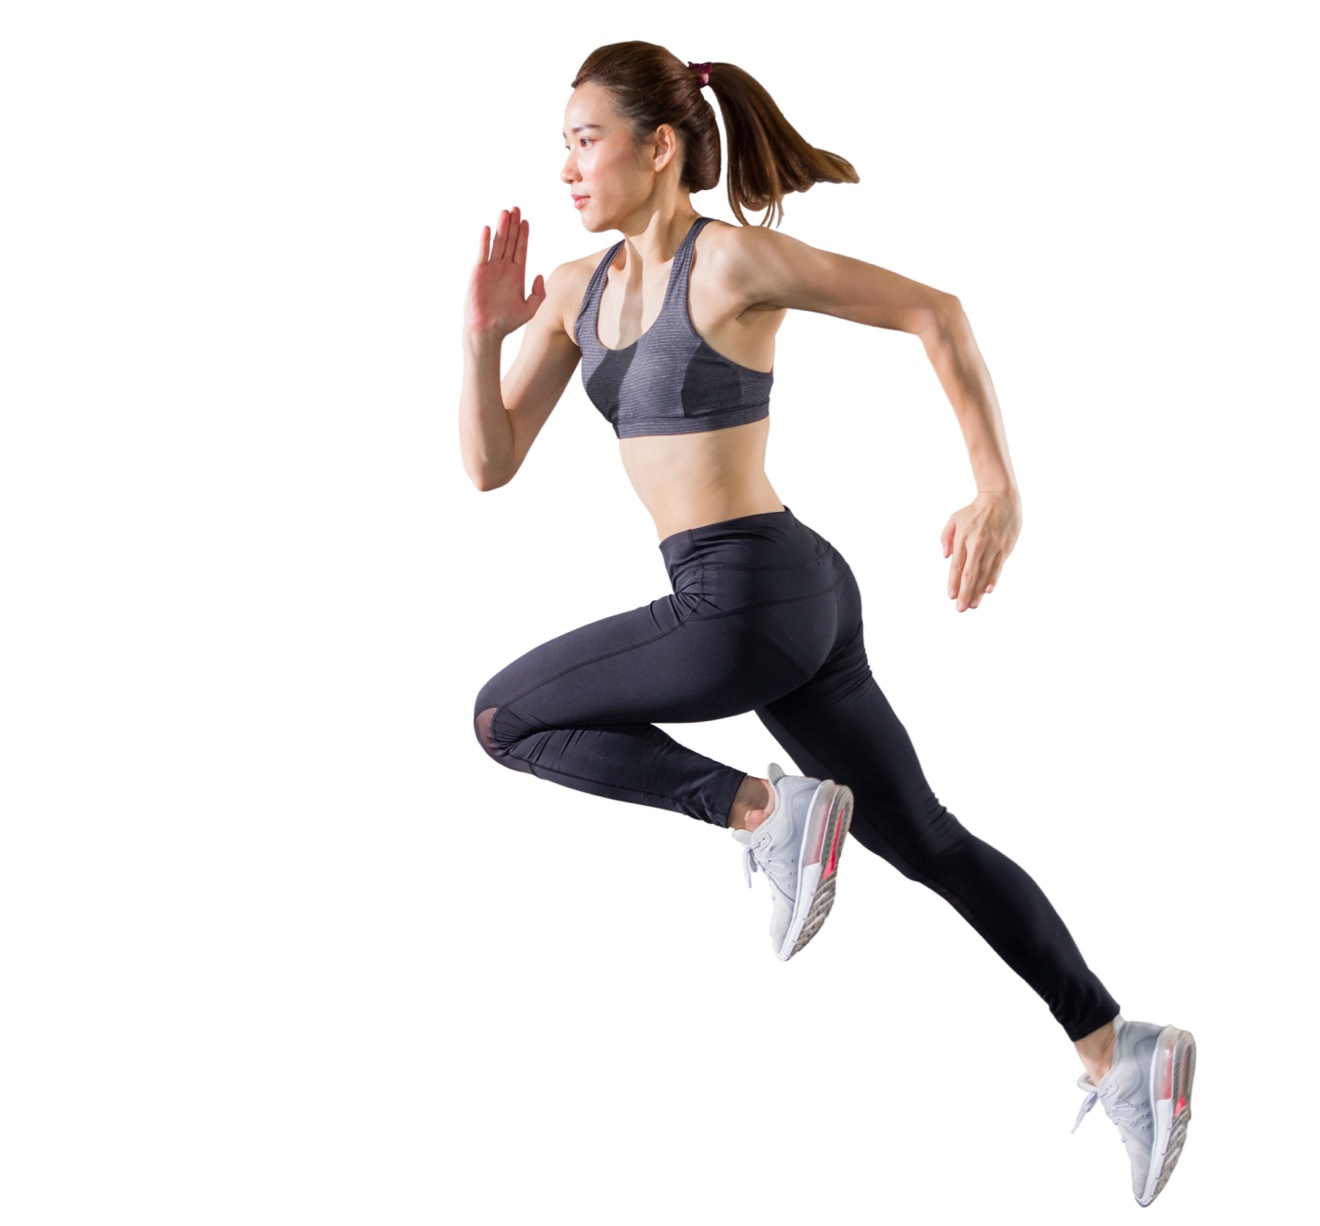 Woman in running pose